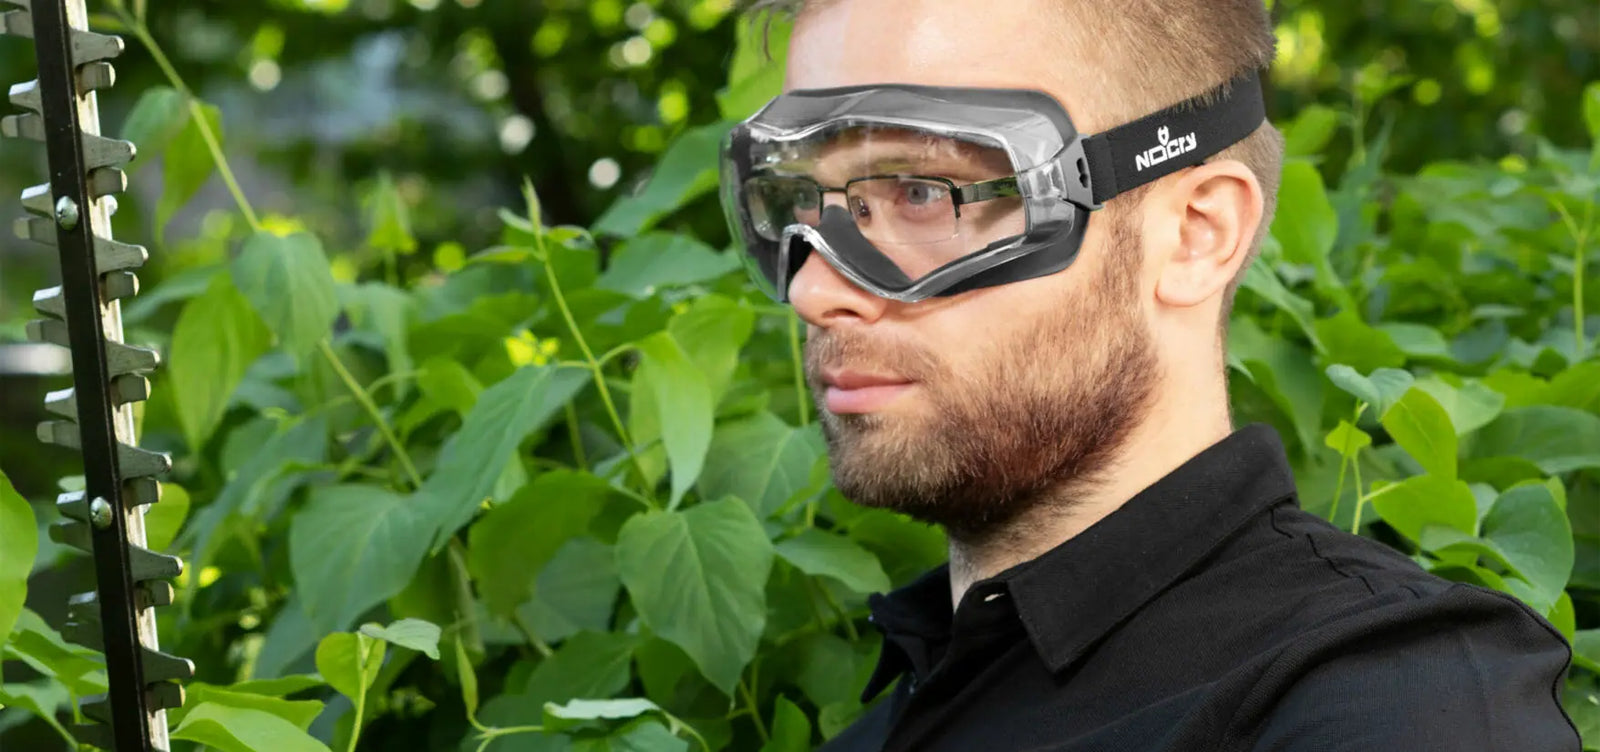 Face shield vs safety goggles – Which is safer and when?